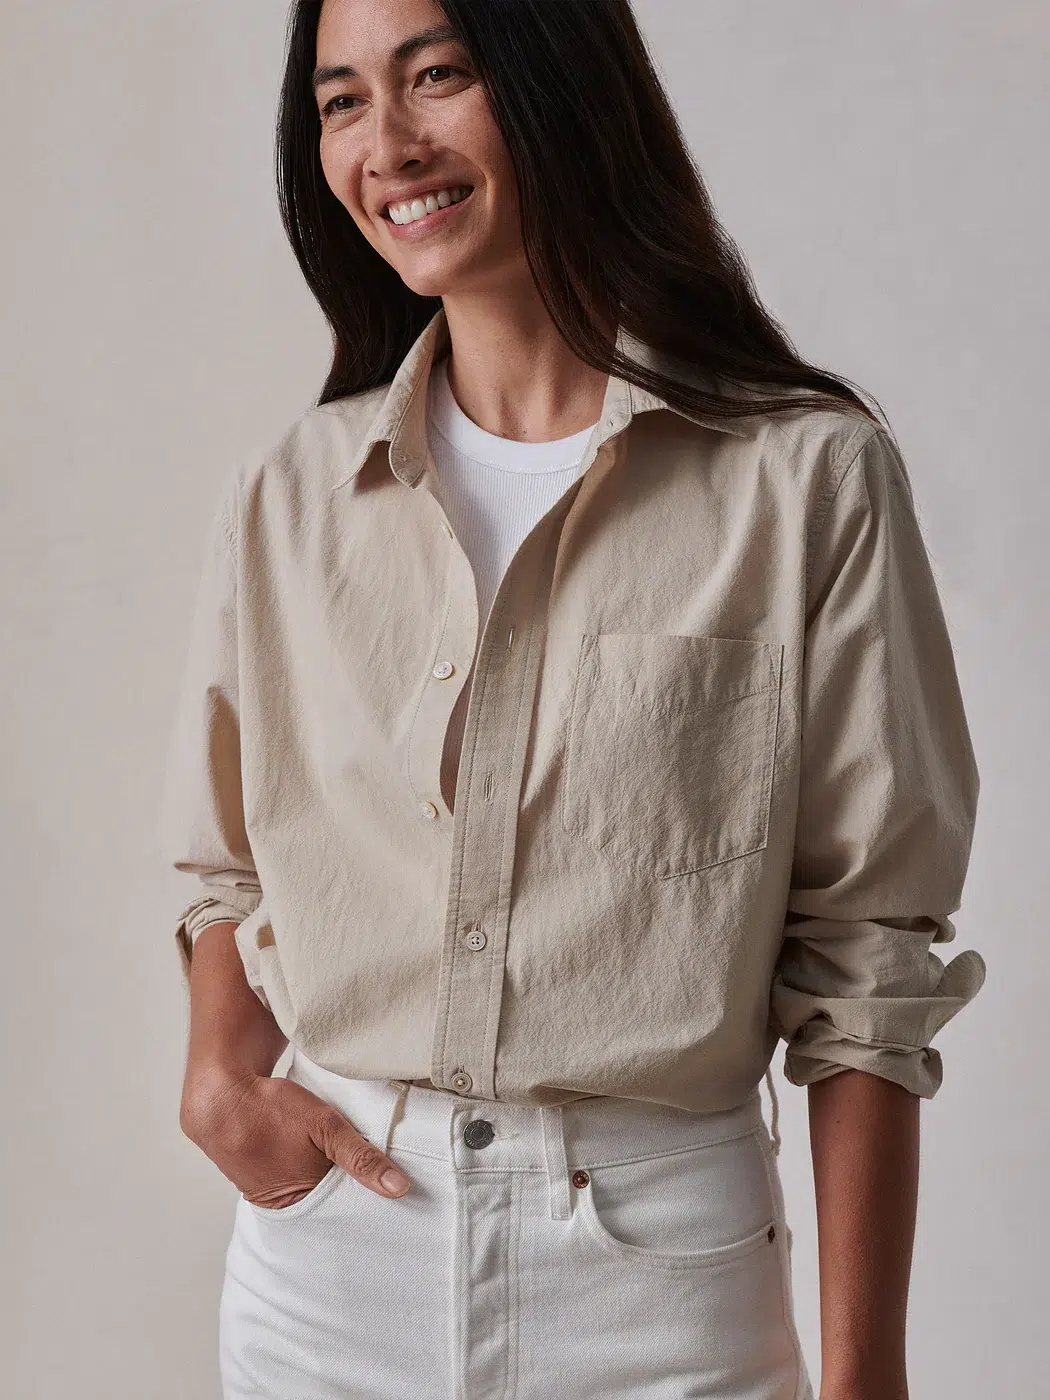 The Button-Down That Wont Leave You With Button-Down Boob Gap